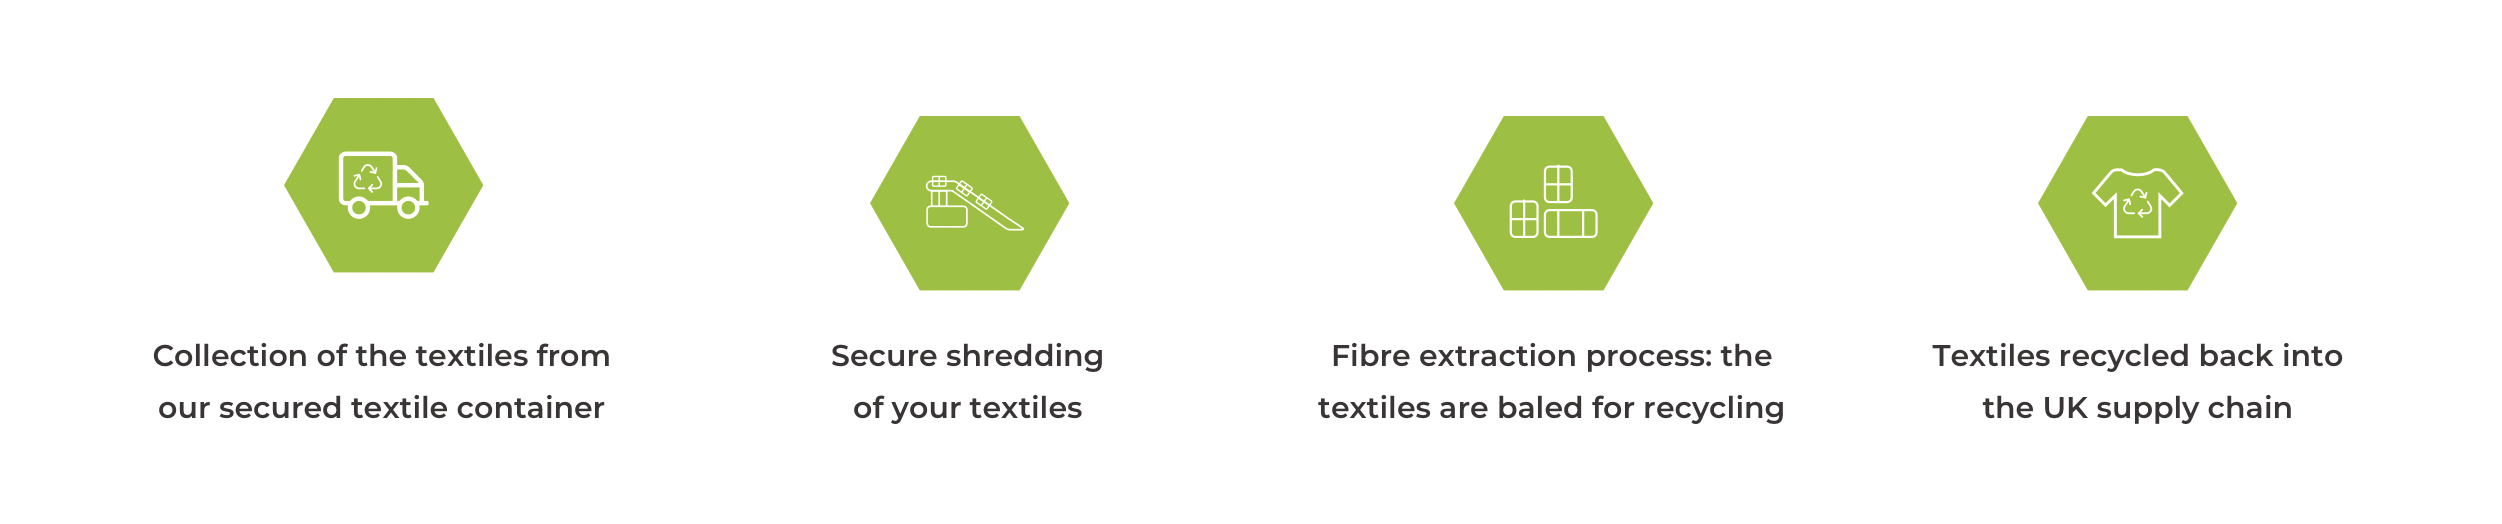 Recycling old textiles to avoid going to a landfill